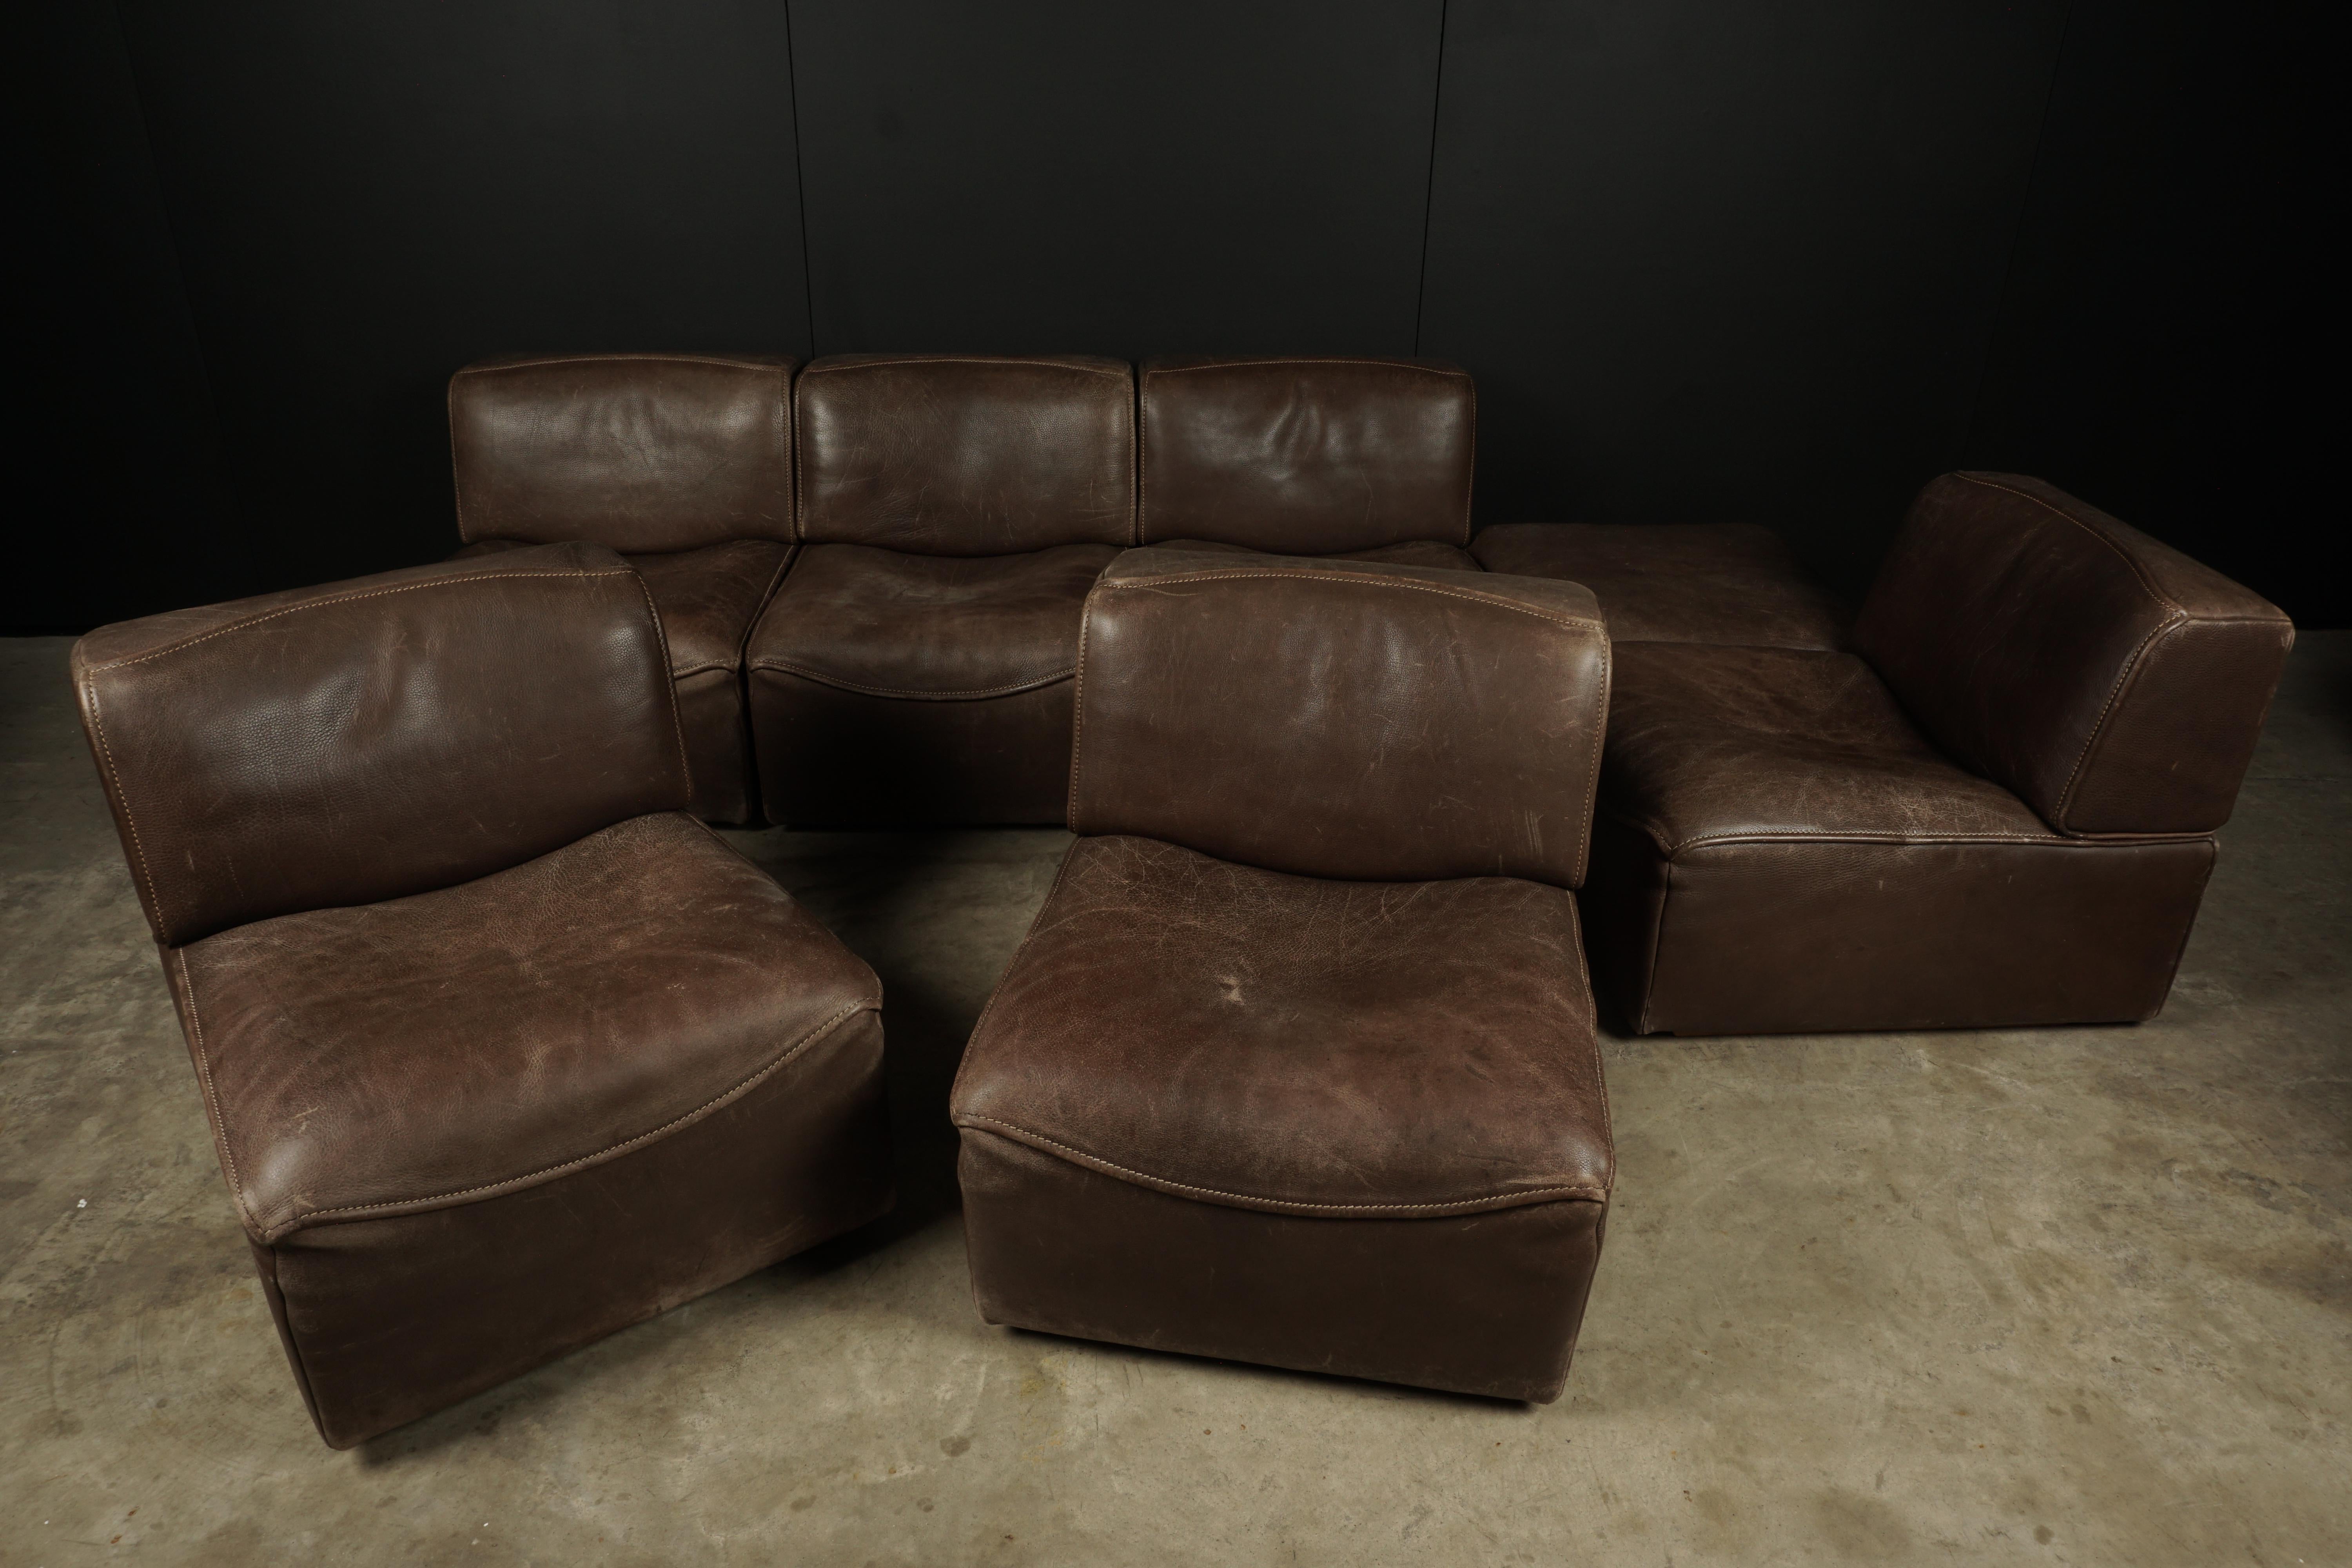 Vintage De Sede 'Ds-15' modular sofa in brown buffalo leather from Switzerland, circa 1970. This sofa contains six modular straight elements and one ottoman allowing you to arrange the sofa to your own wishes.